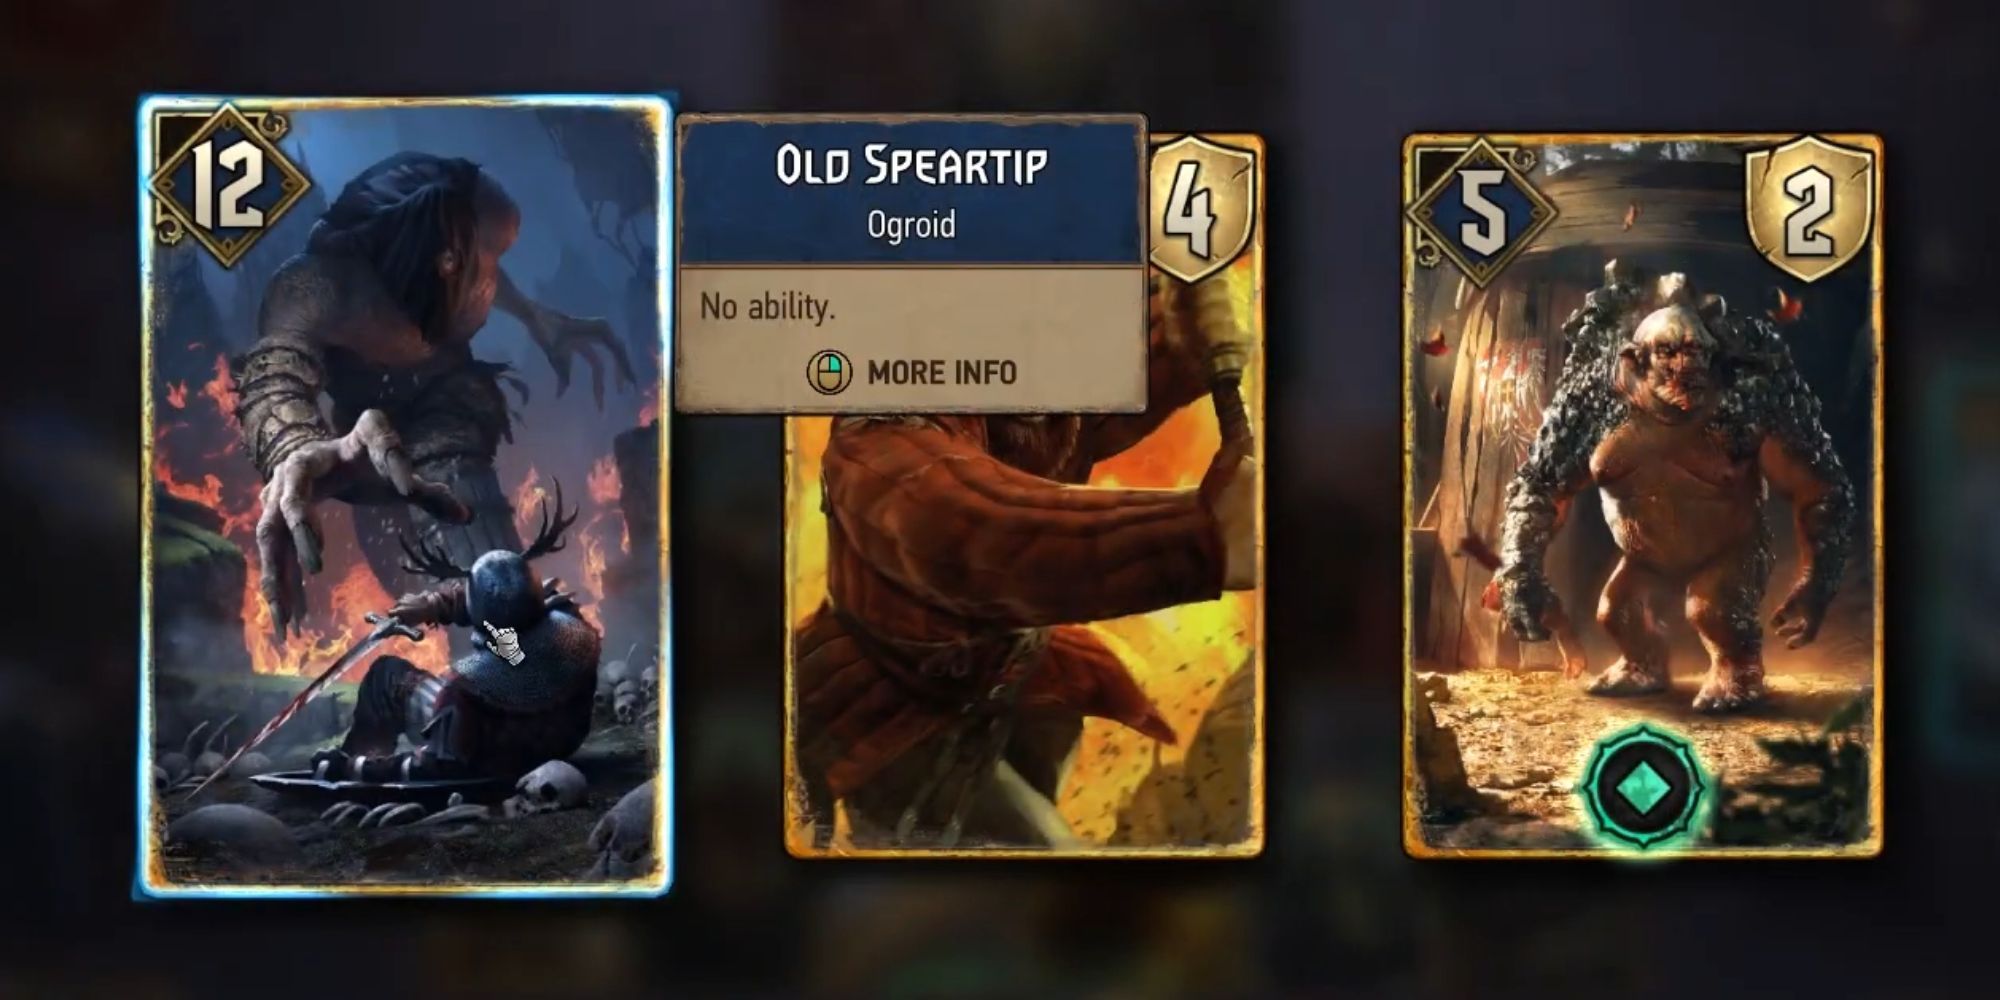 Gwent Rogue Mage Old Speartip card. Ogroid towering over a cowering knight.